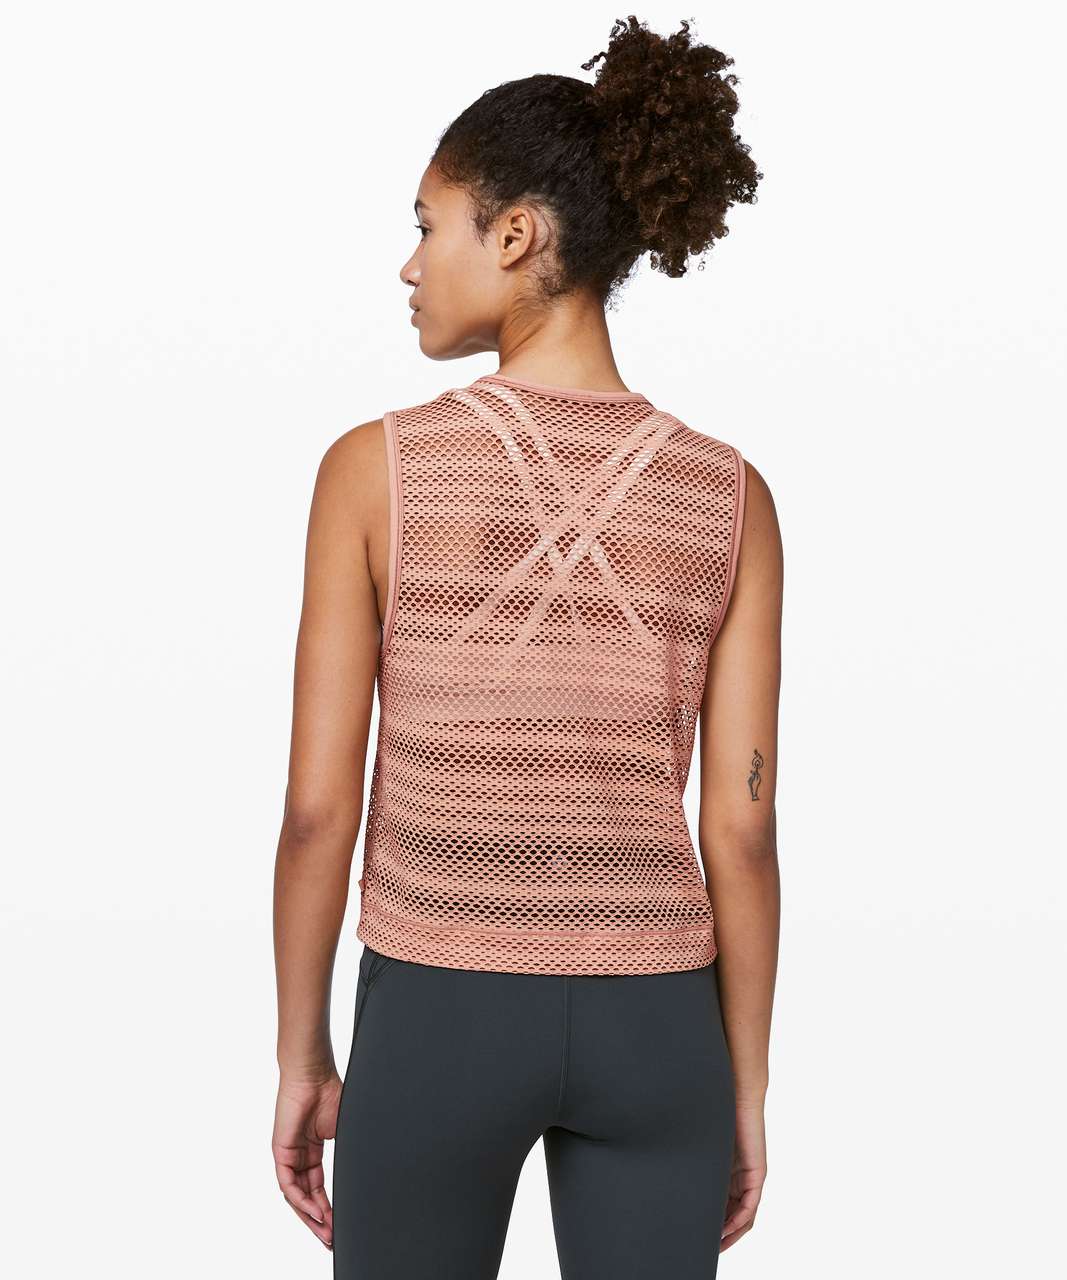 Lululemon Sweat Your Heart Out Tank - Antique